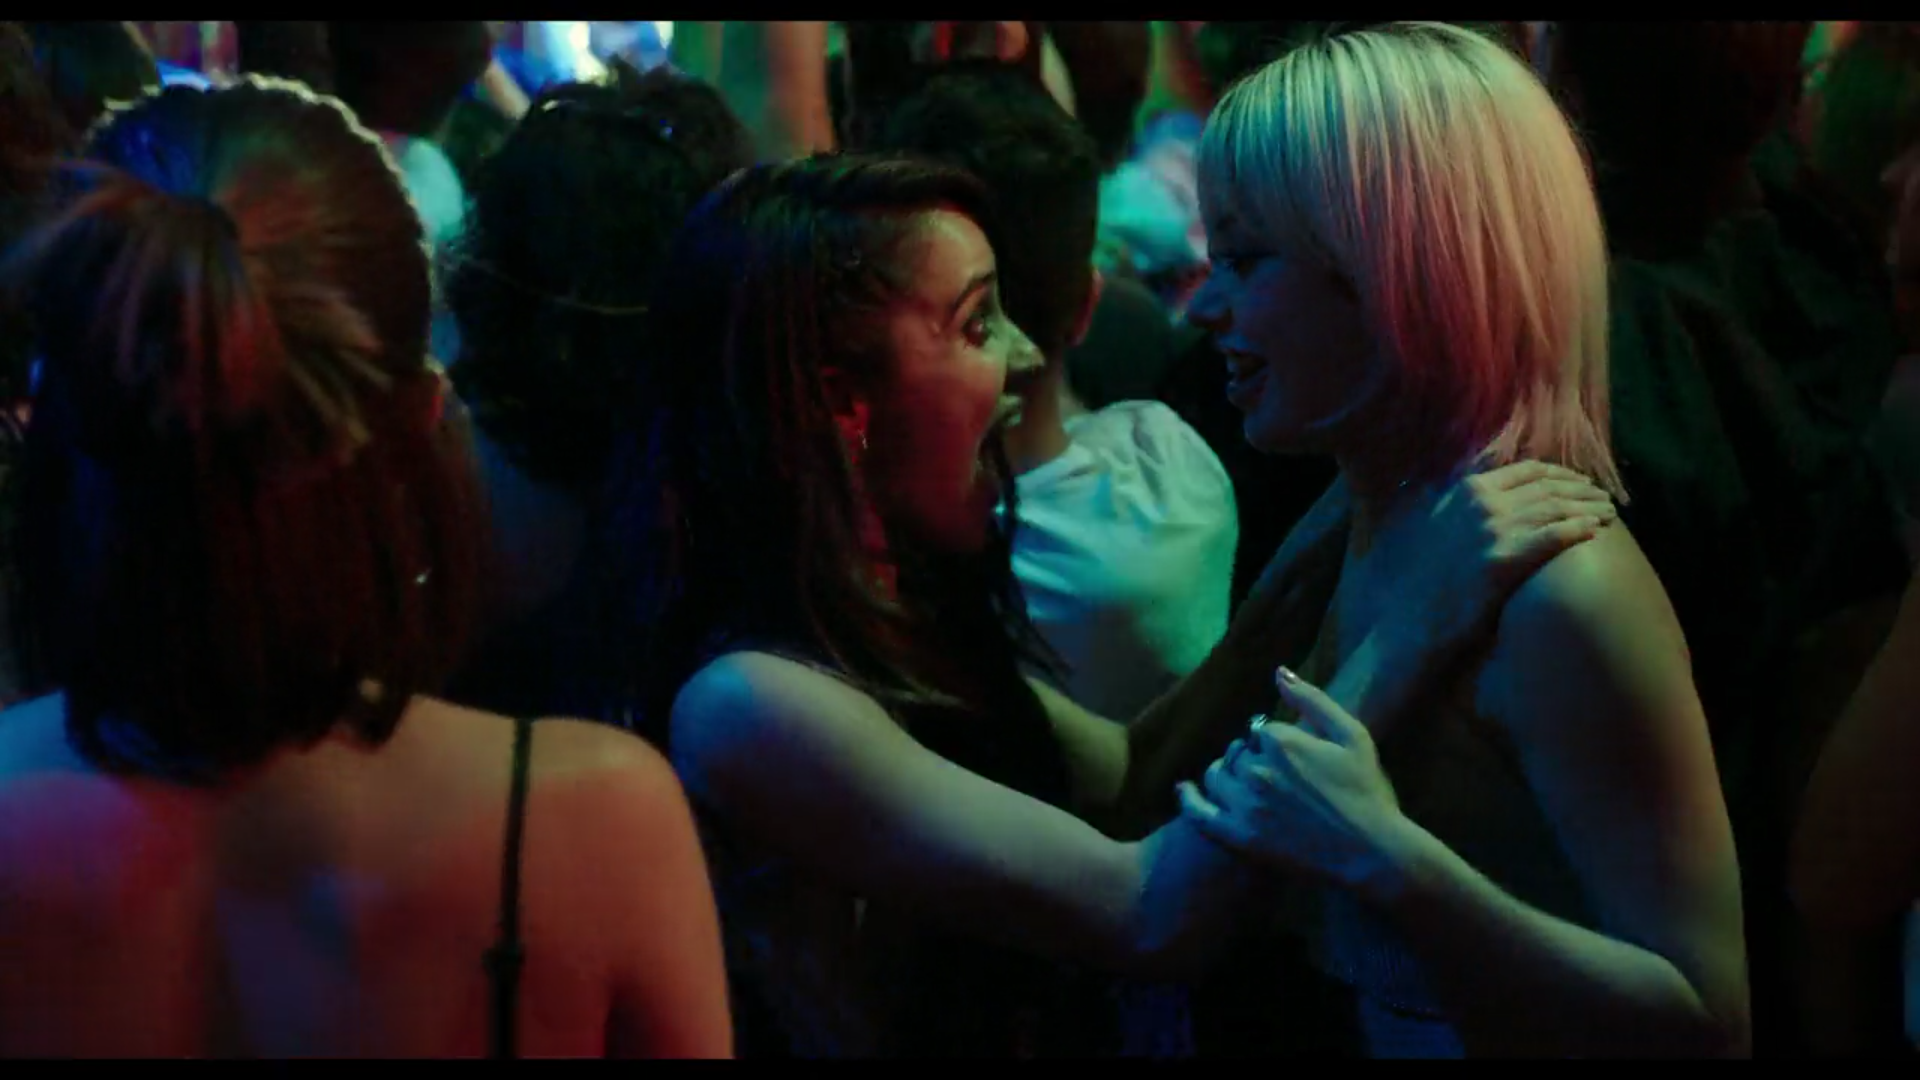 Two teenage girls at a crowded club smile excitedly at each other.